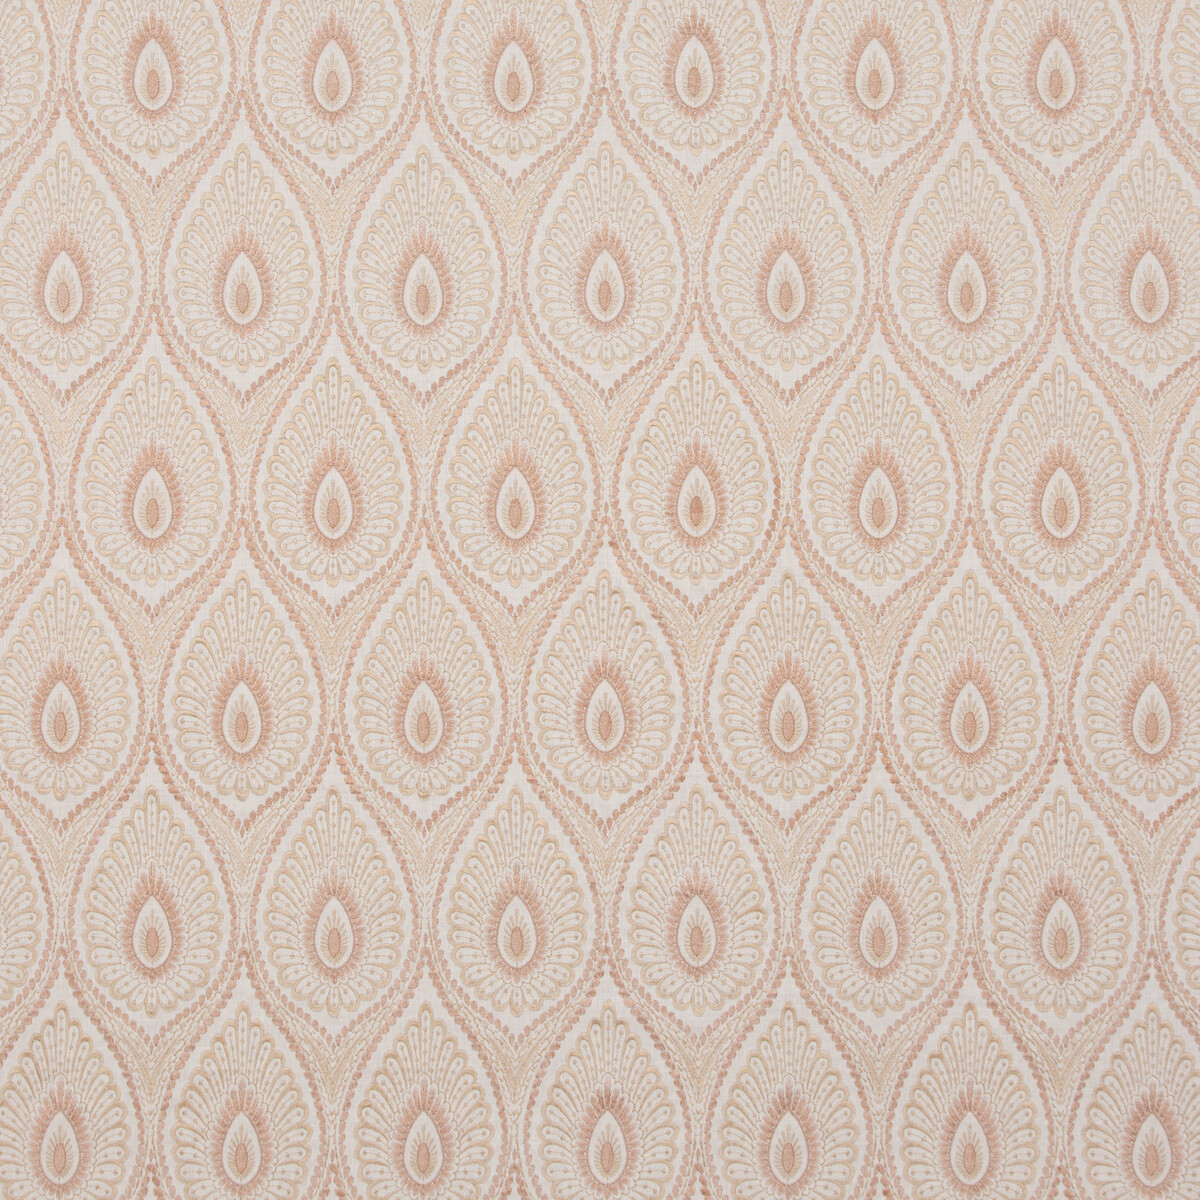 G P & J Baker Bf10955.2.0 Ashmore Drapery Fabric in Shell/Pink/Beige